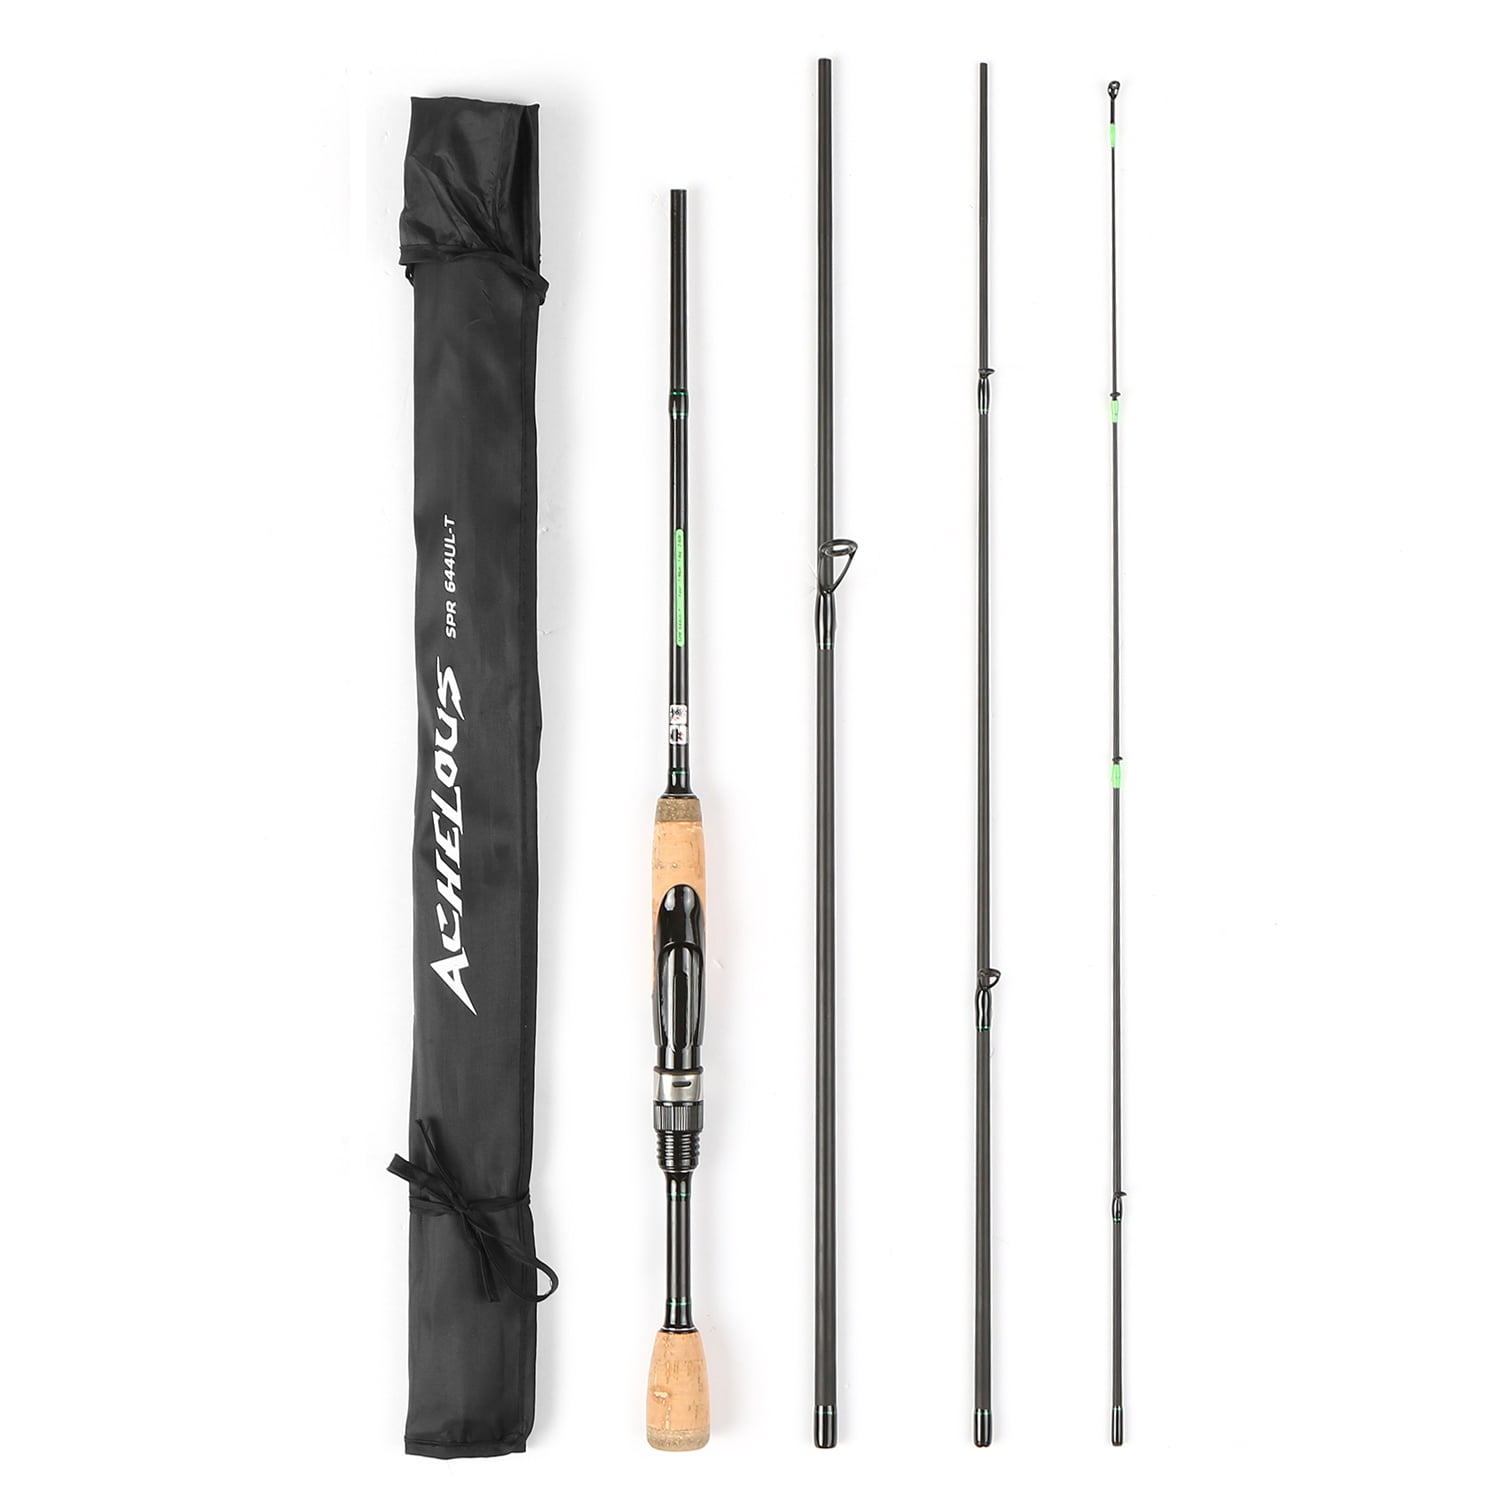 Portable Travel Spinning Fishing Rod 6.8FT Lightweight Carbon